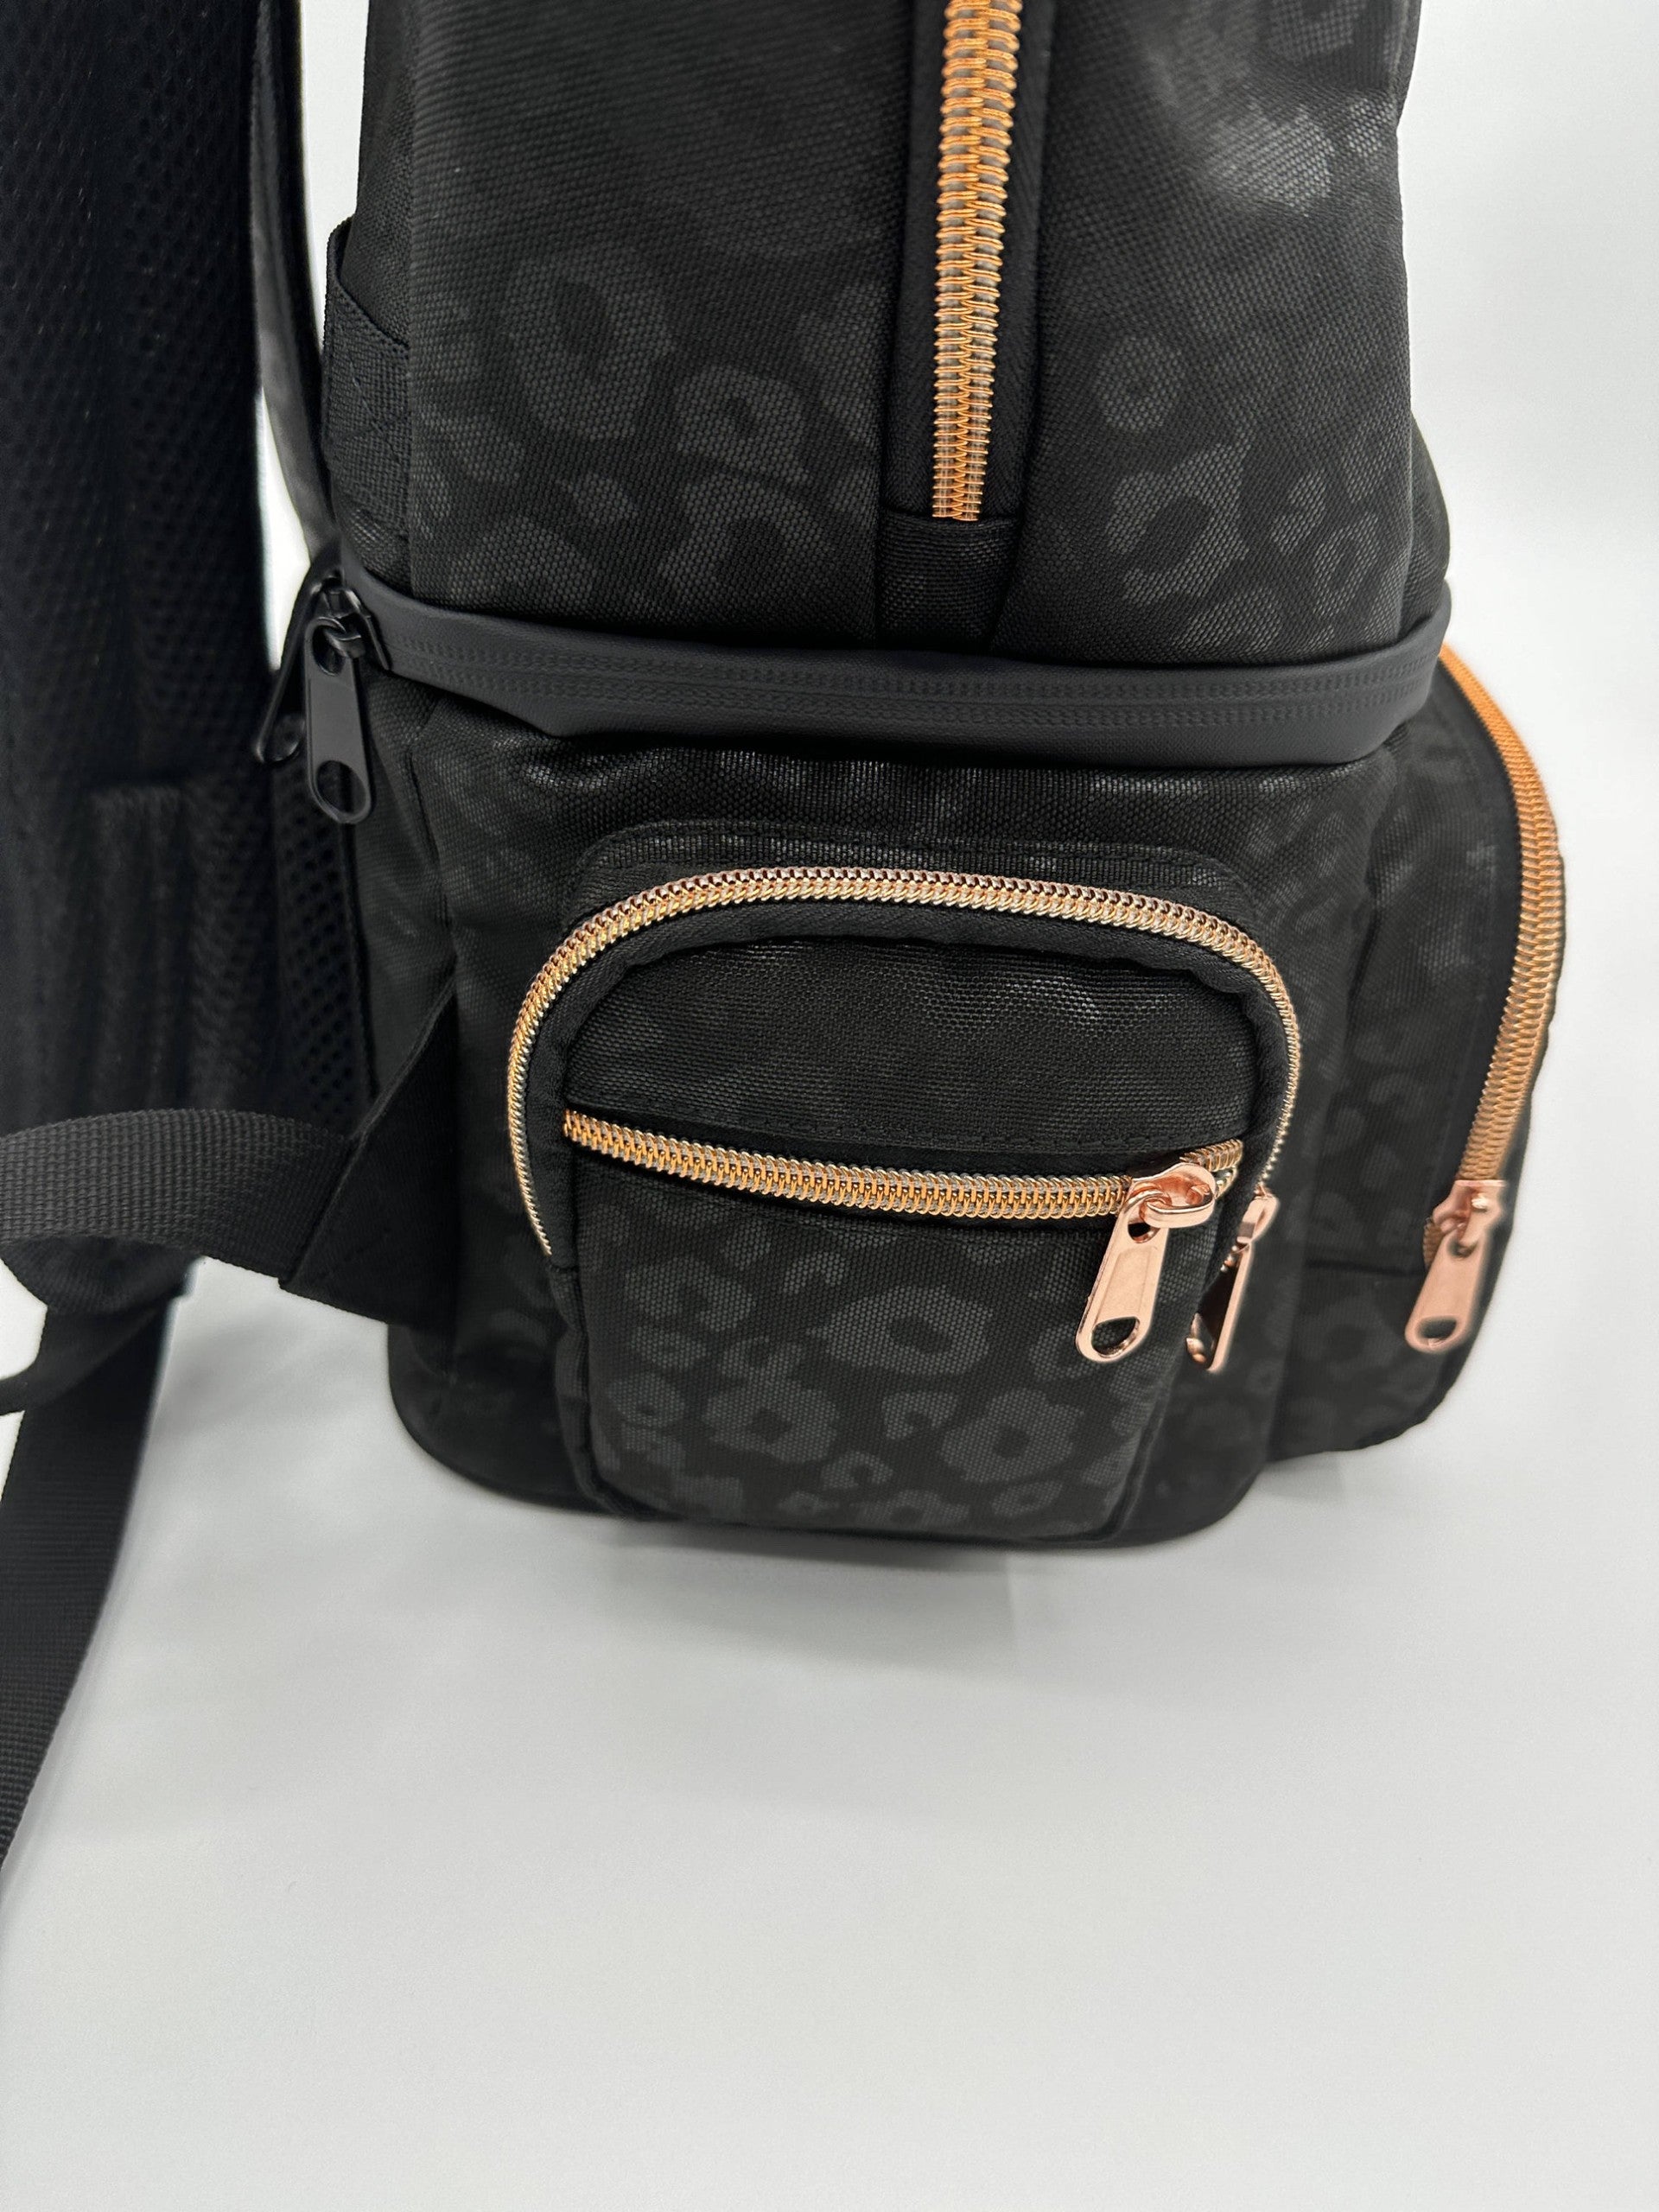 Chlo's "ALL-IN-ONE" Backpack & Cooler (Coming Soon)